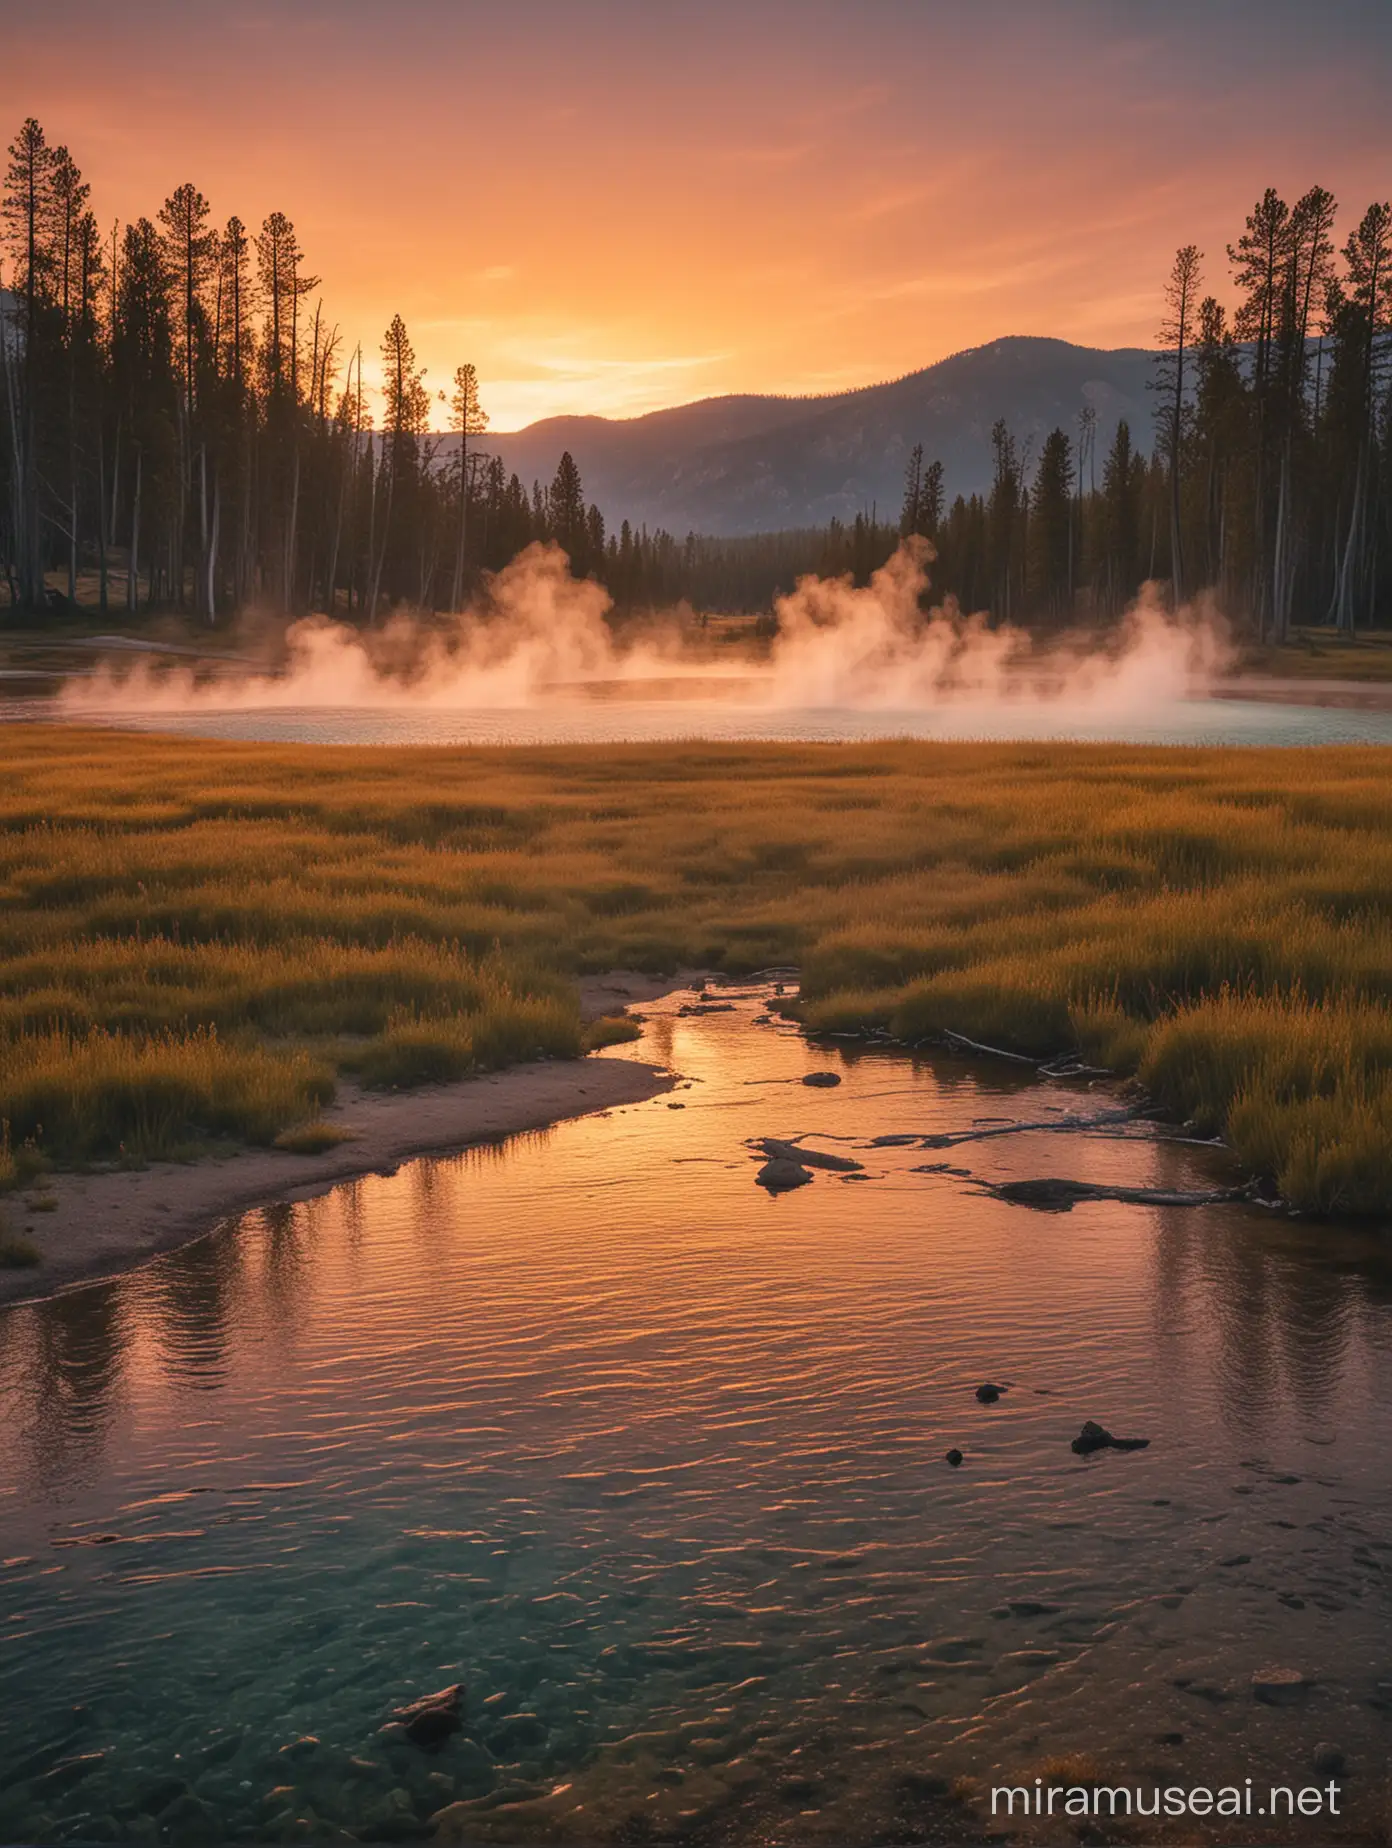 a wonderful photograph from a sunet in Yellowstone, serne feelings, nostalgic vibes, wonderful colors